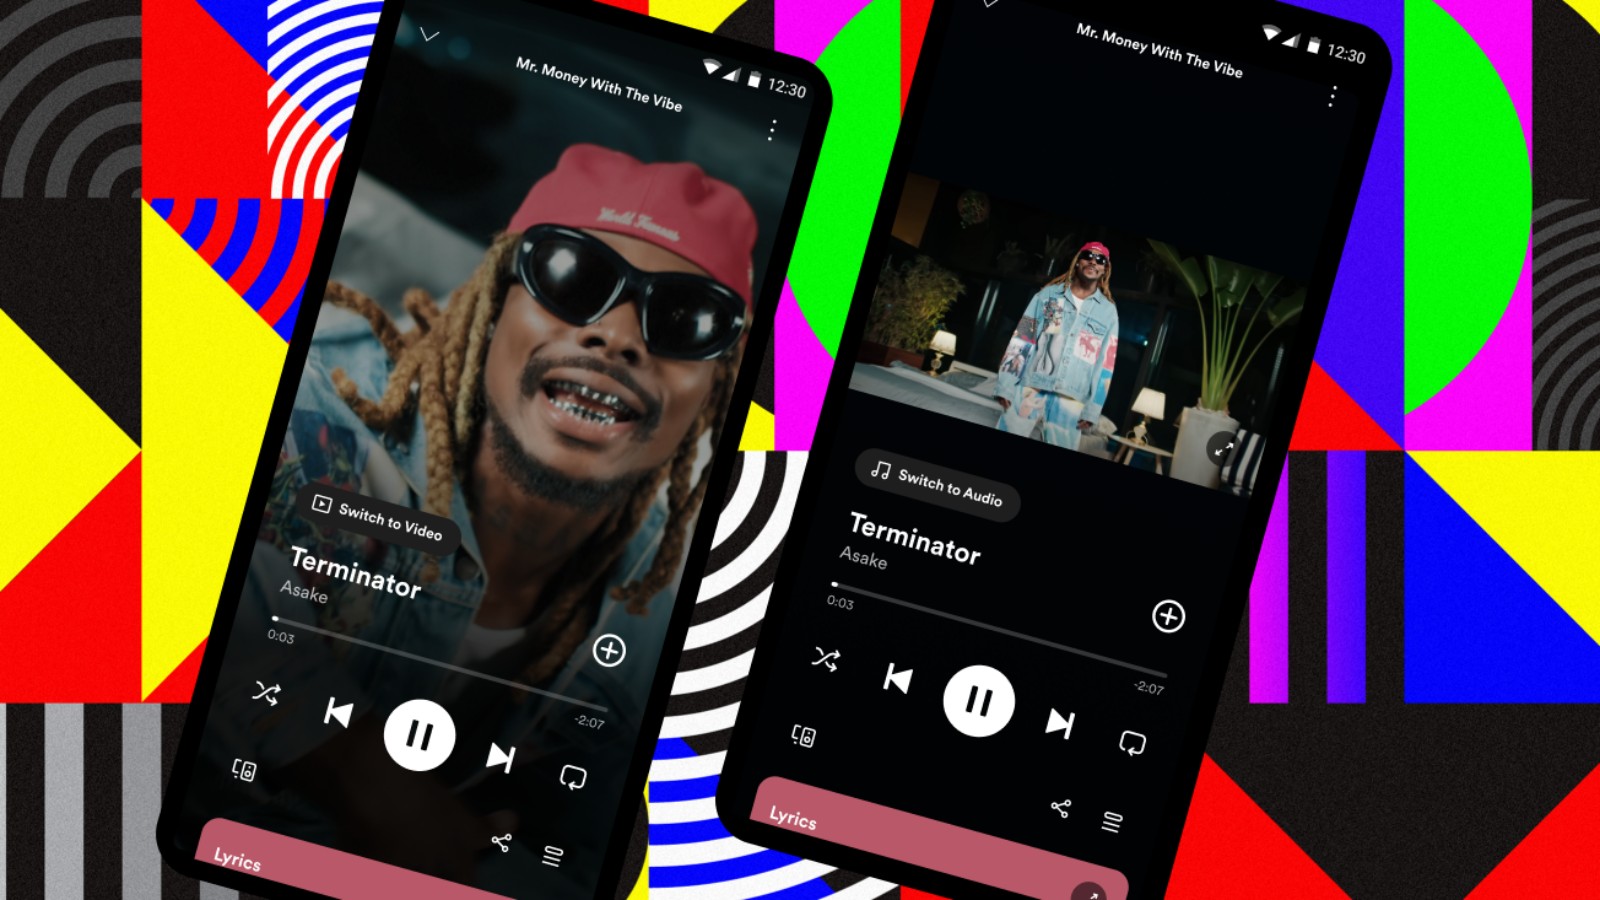 Spotify is experimenting with a new remix feature inspired by TikTok, according to reports from Technology News